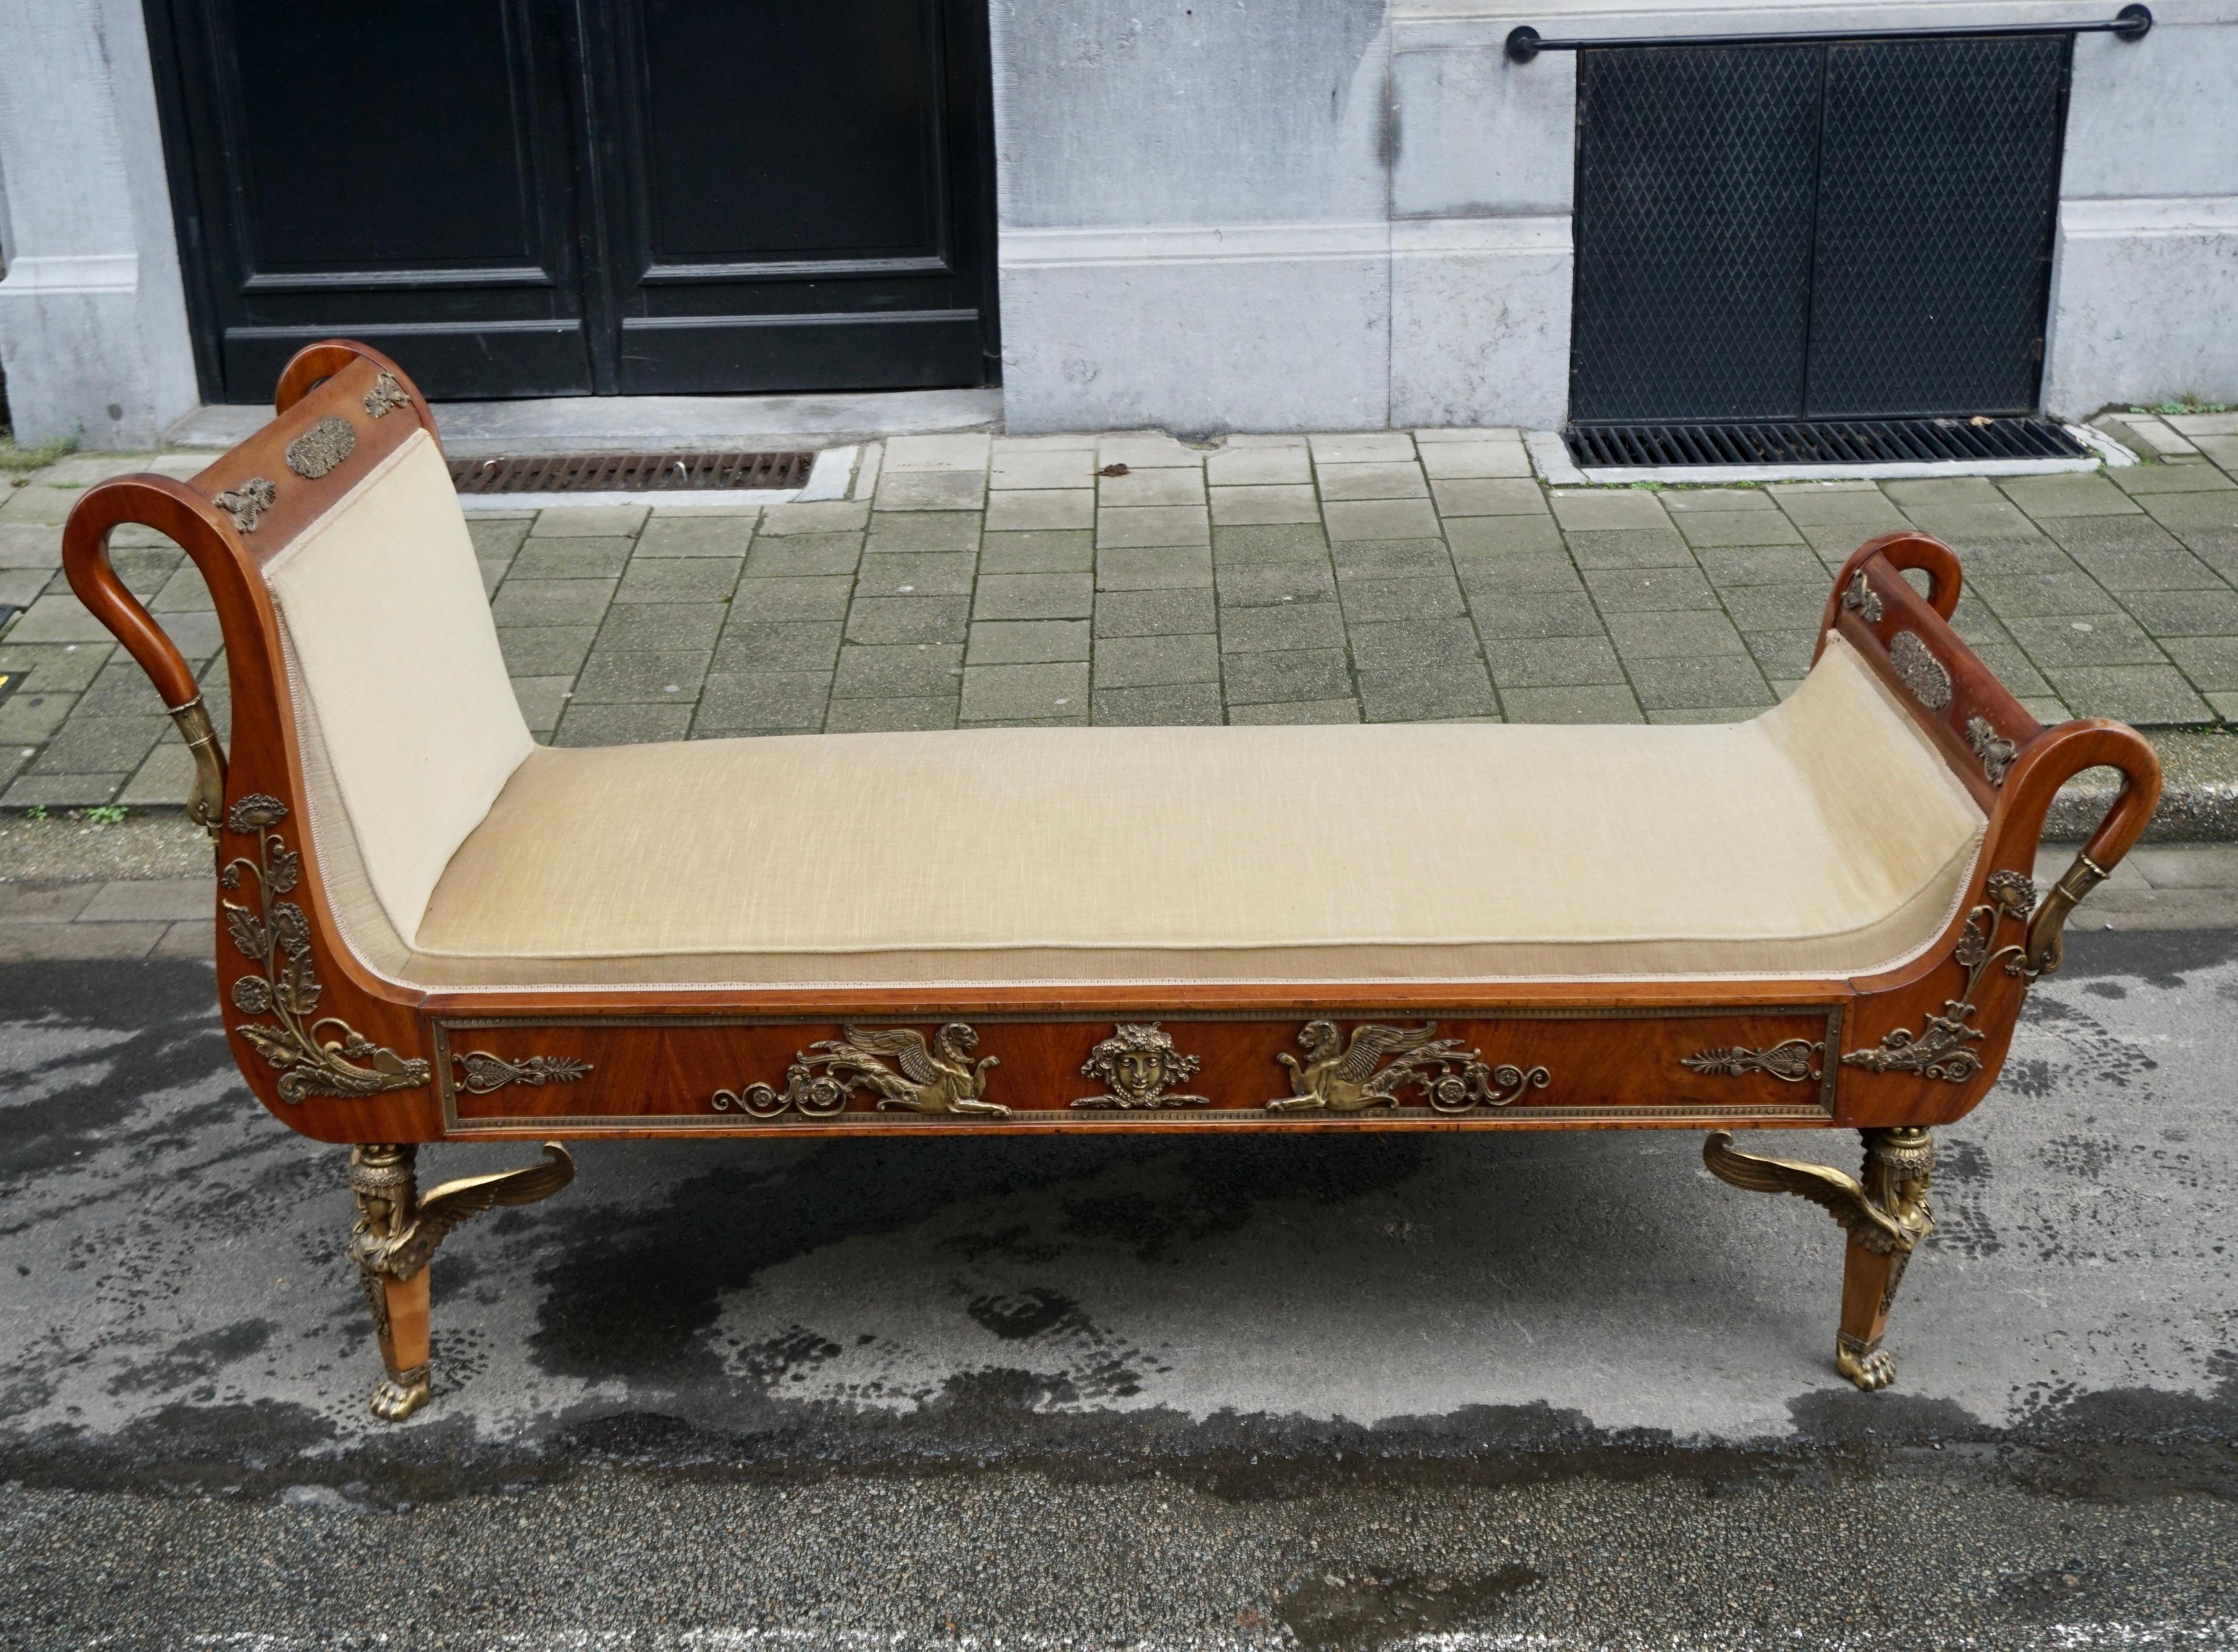 Incredible Gilt Bronze-Mounted Swan Neck Daybed in French Empire Style For Sale 4